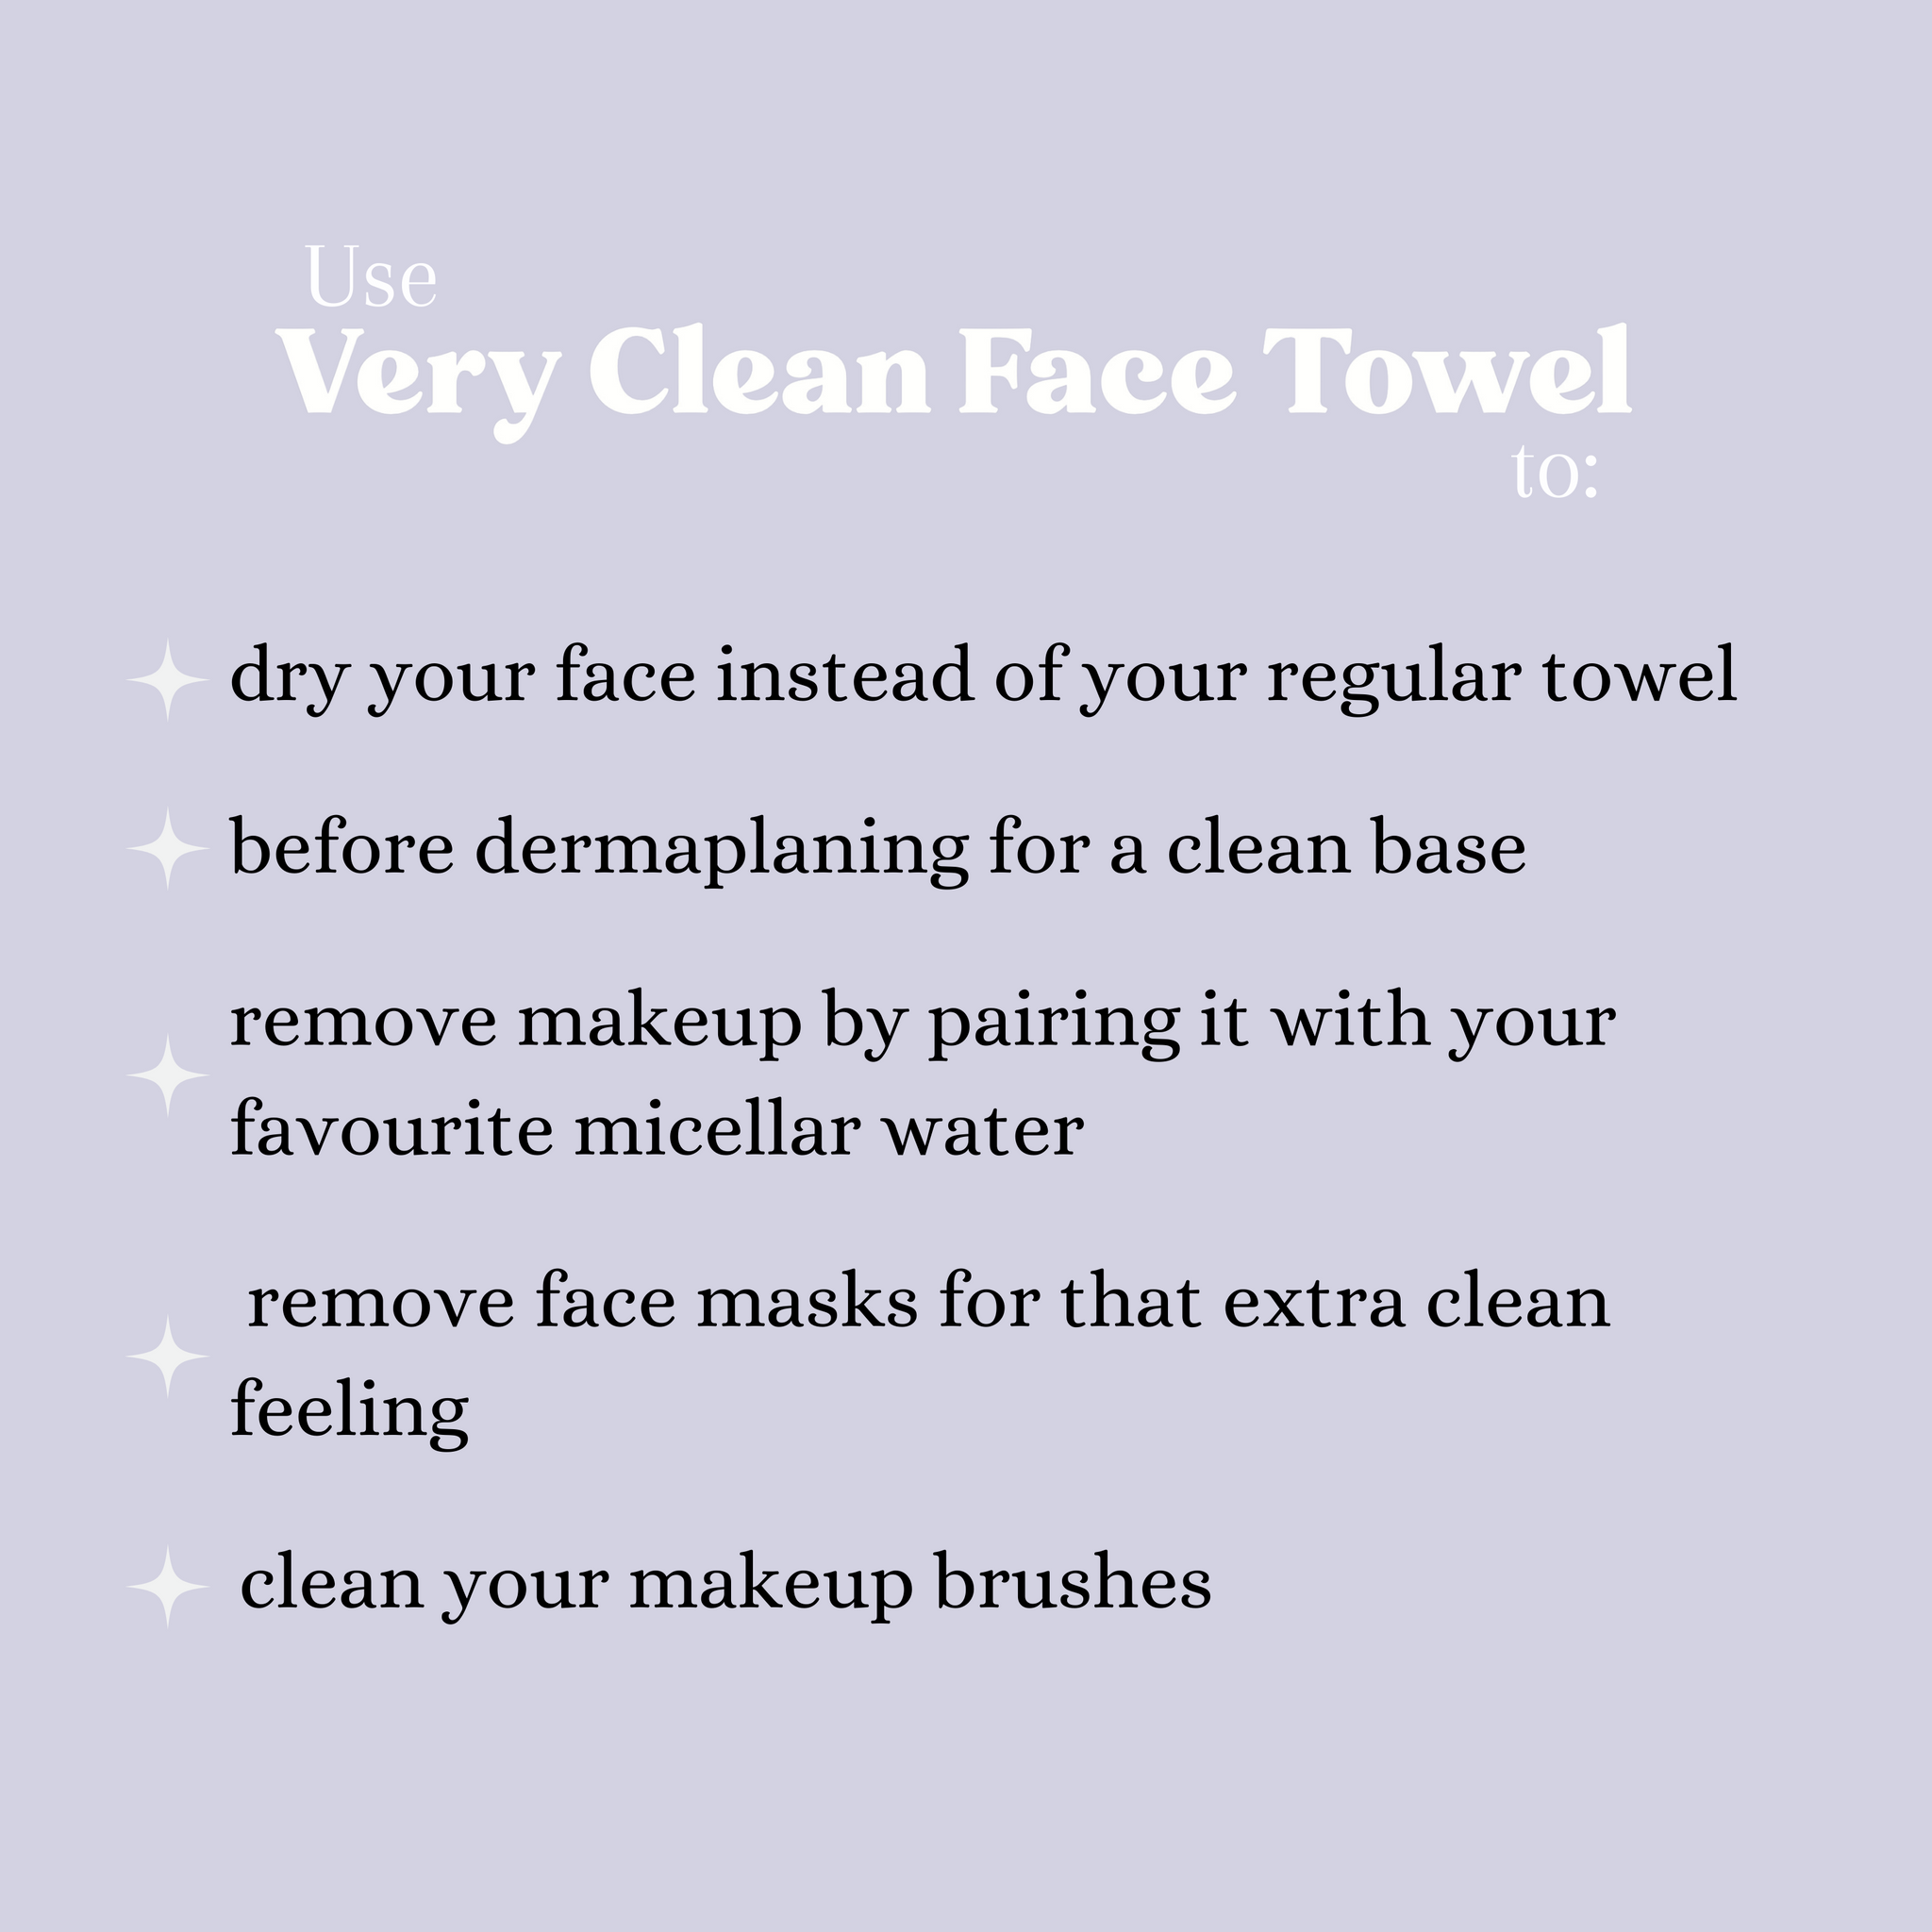 Very Clean Face Towel